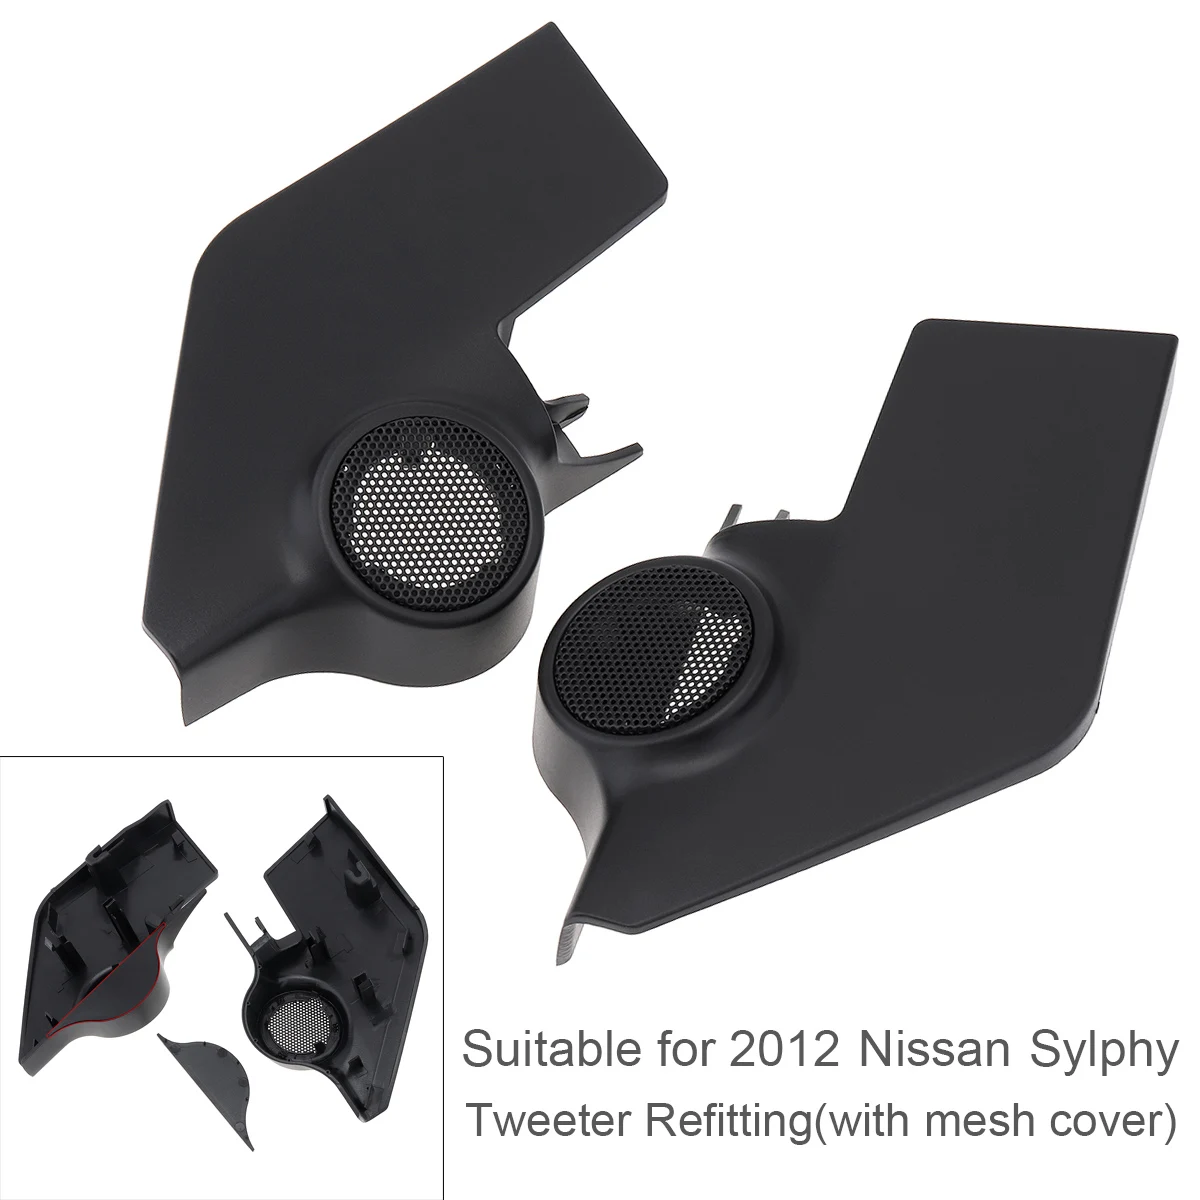 ABS Plastic Materia Hifi System Tweeter Horns Cover  Fit for Nissan 2012  Refitting Installation Front Door Speaker Adapter Kit